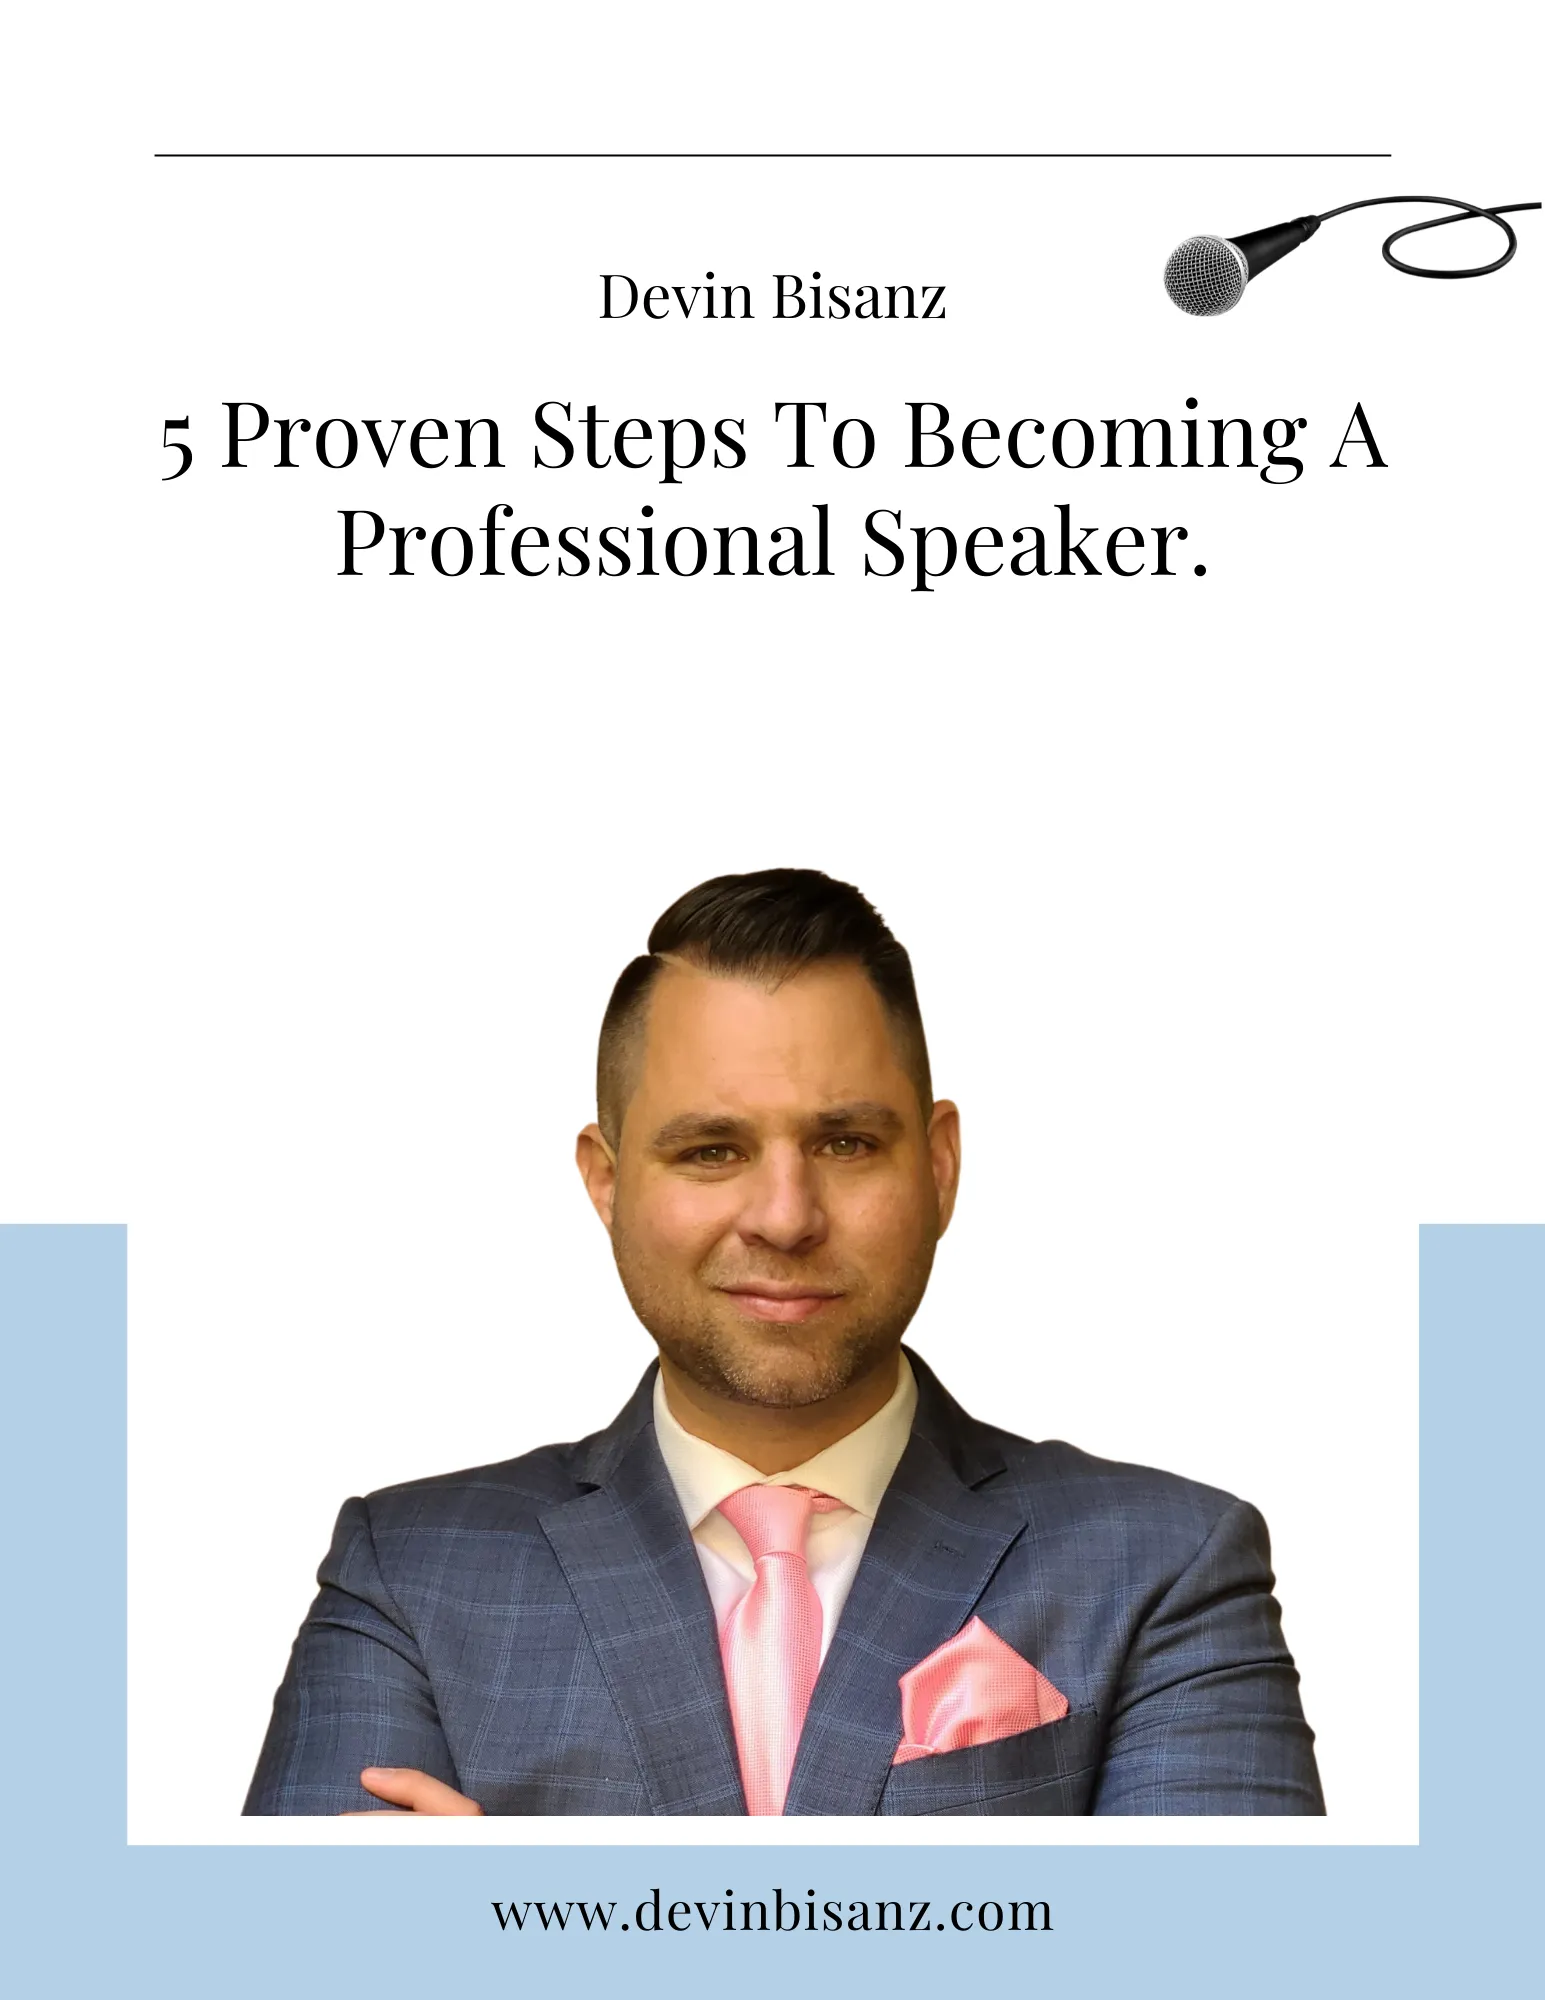 How To become a professioal speaker